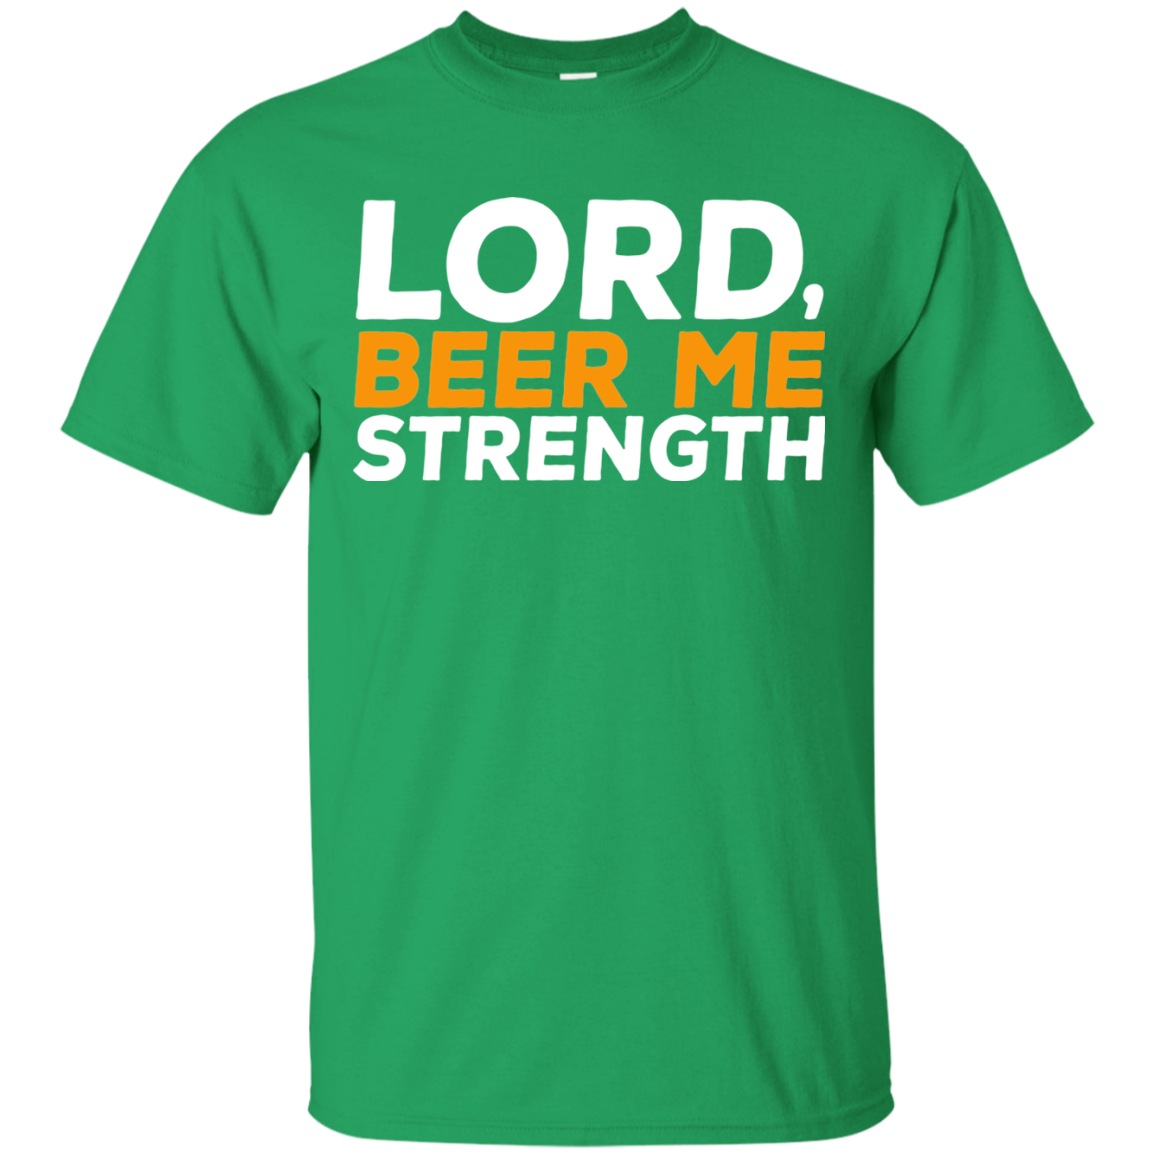 Lord, Beer Me Strength T-Shirt Apparel - The Beer Lodge